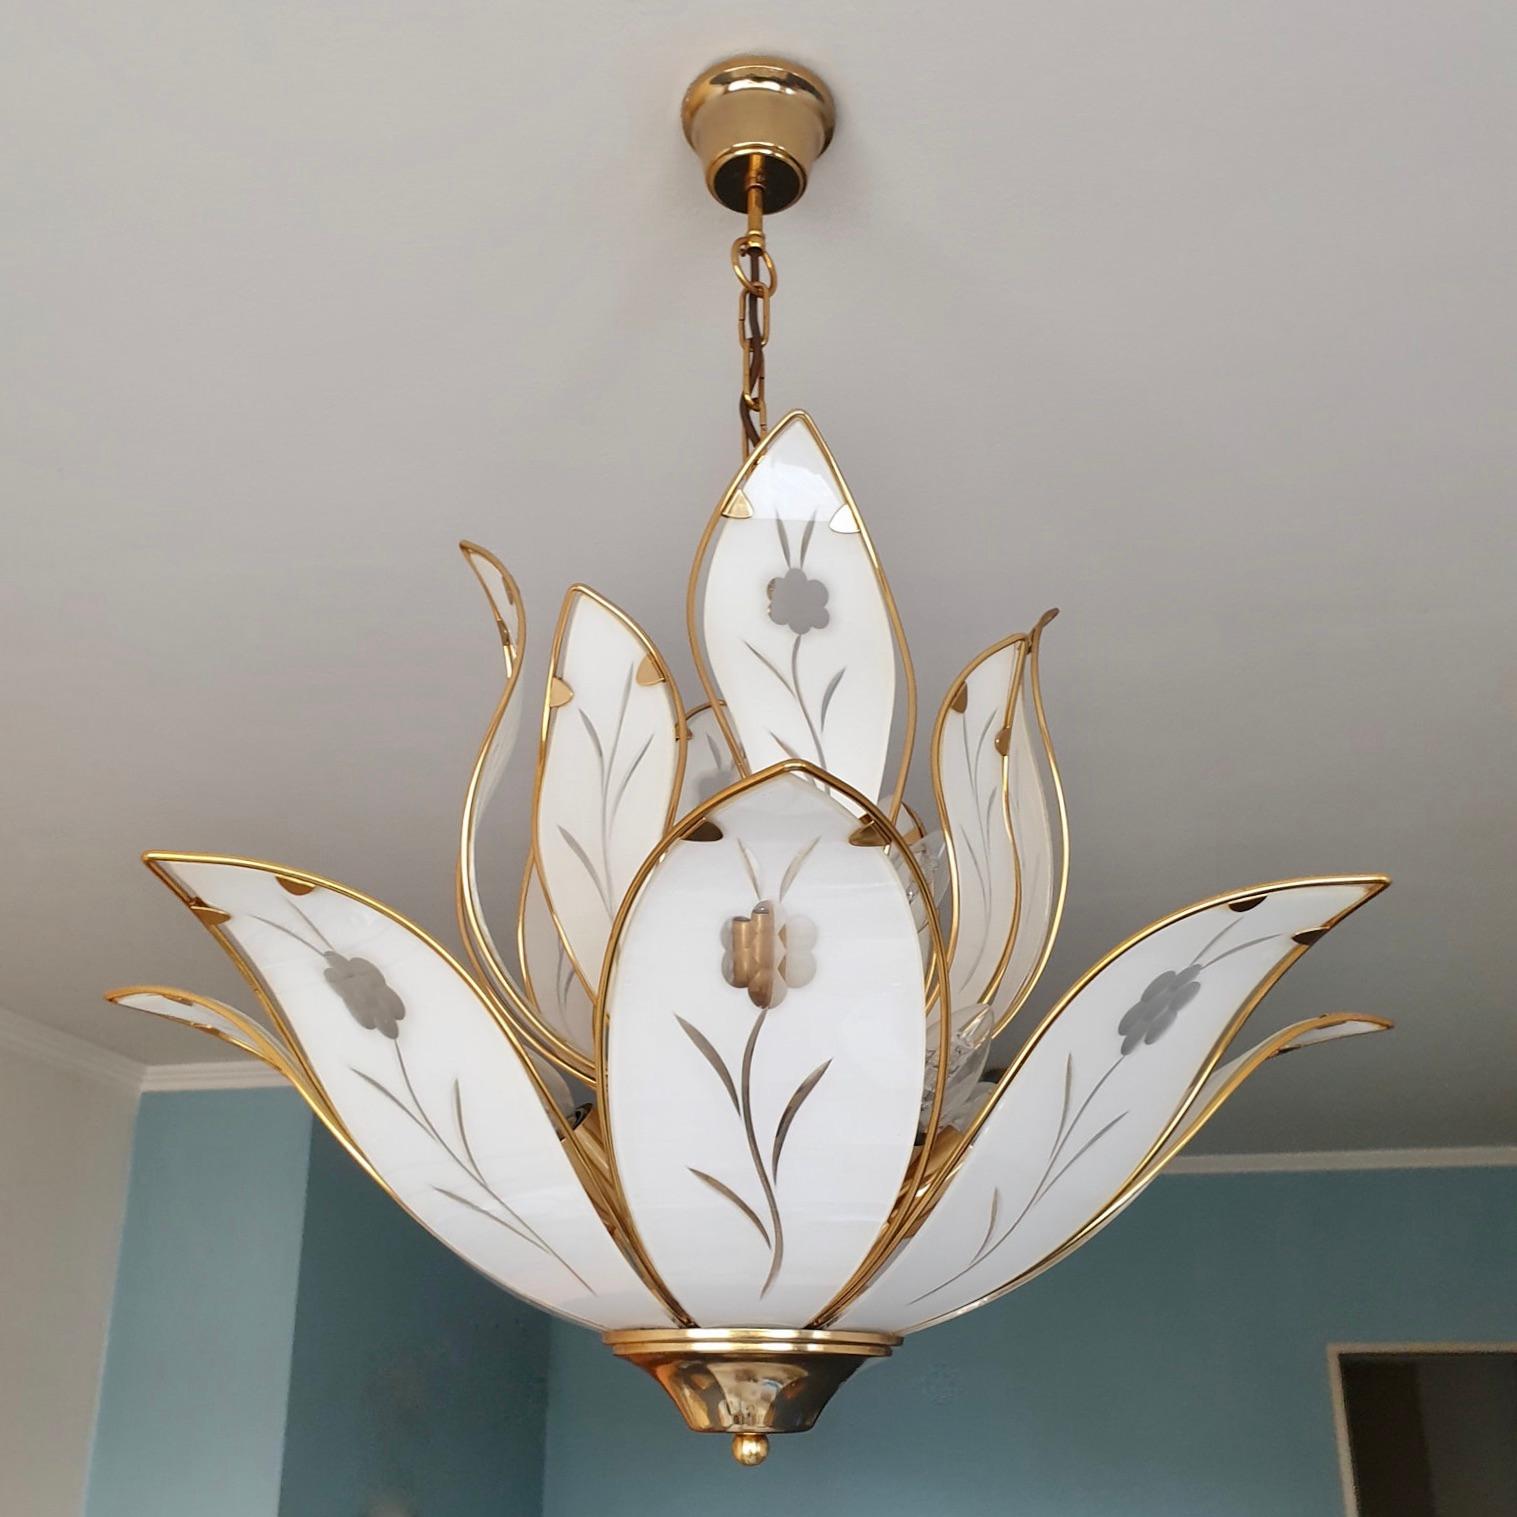 Hollywood Regency Two Lotus Chandeliers in Brass and White Murano Glass in Franco Luce Style For Sale